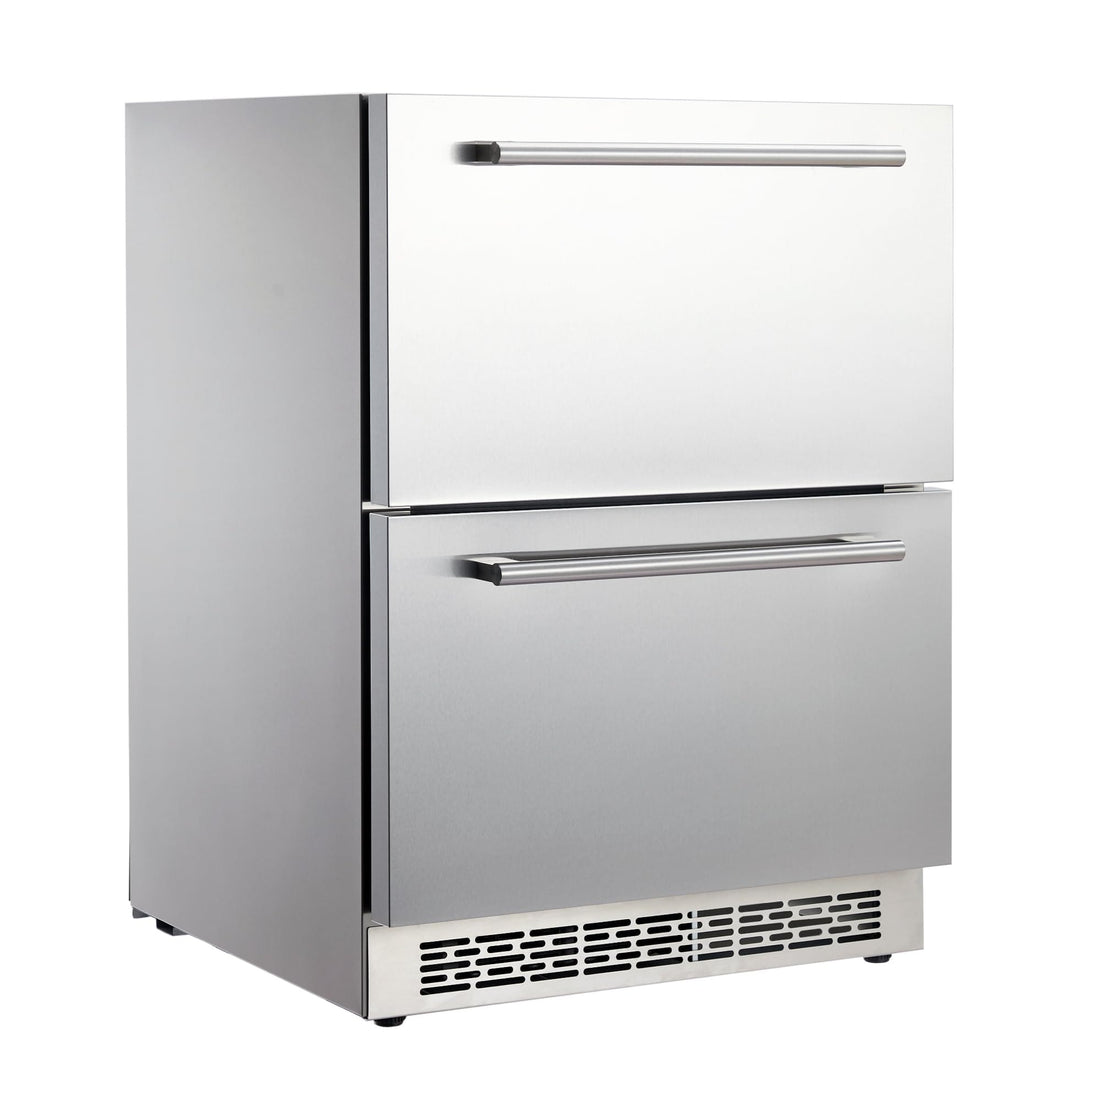 GARVEE 24 Inch Wide Drawer Refrigerator, Built-In Wine, And Beverage Refrigerator Under The Counter, Anti-Fingerprint, for Indoor and Outdoor Use